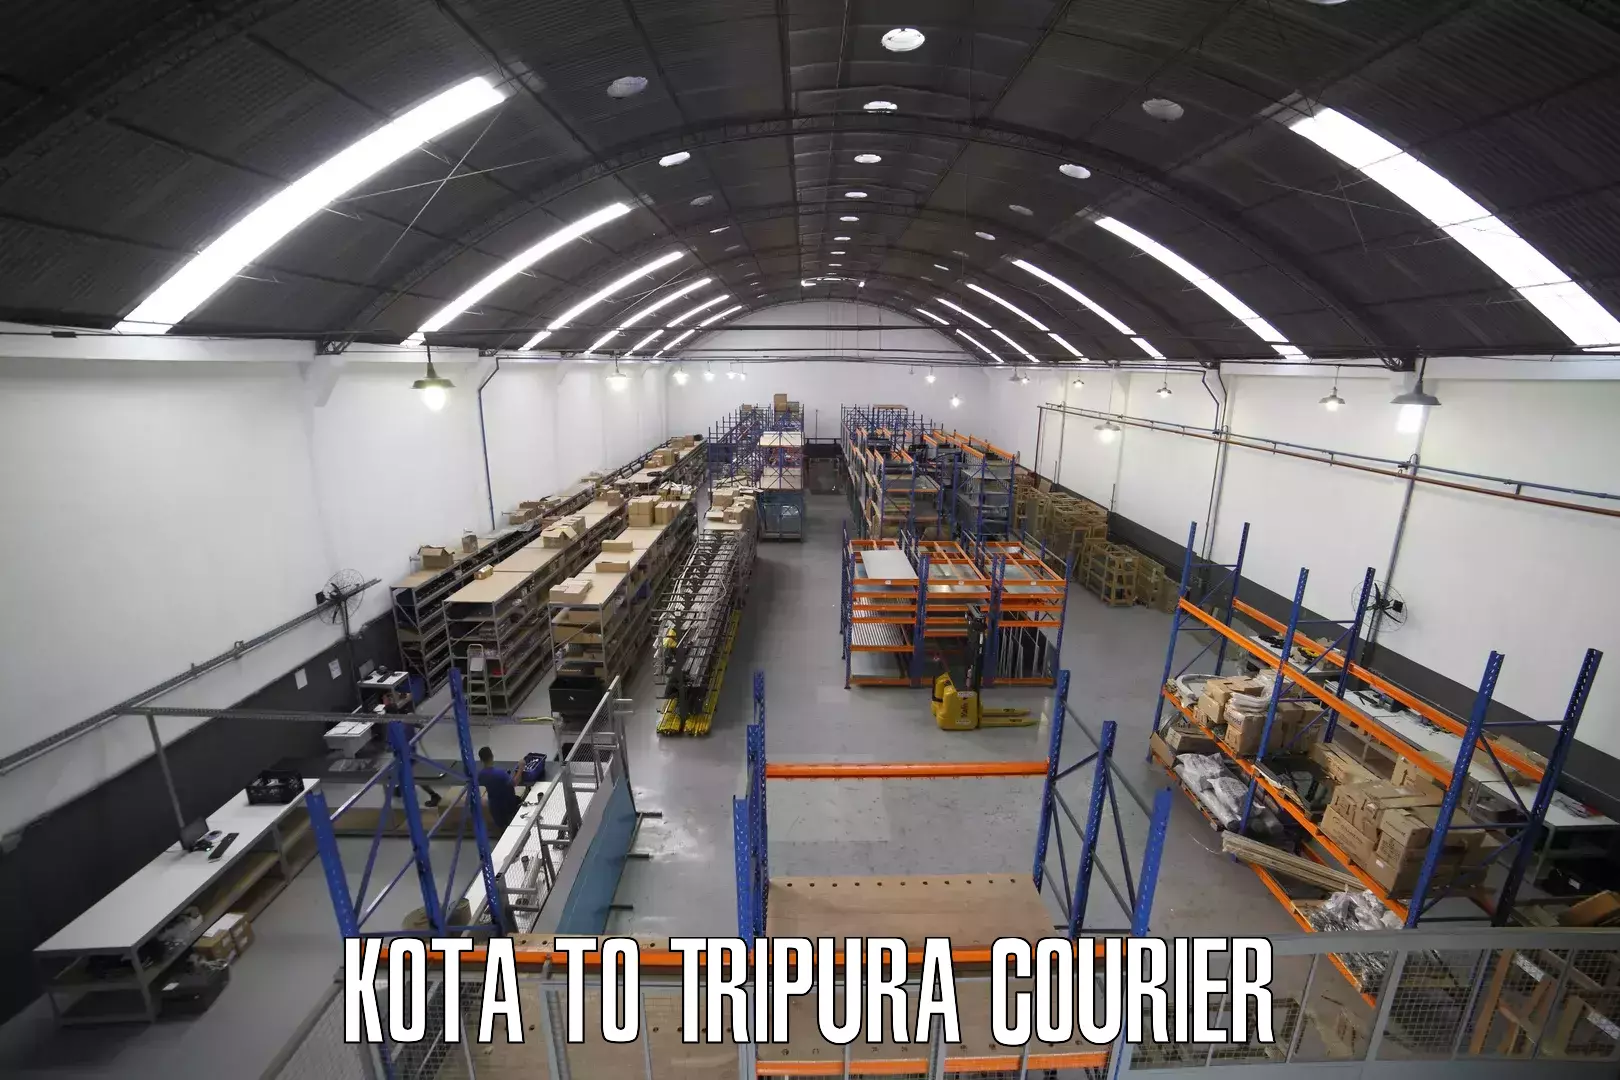 Express delivery capabilities in Kota to Tripura